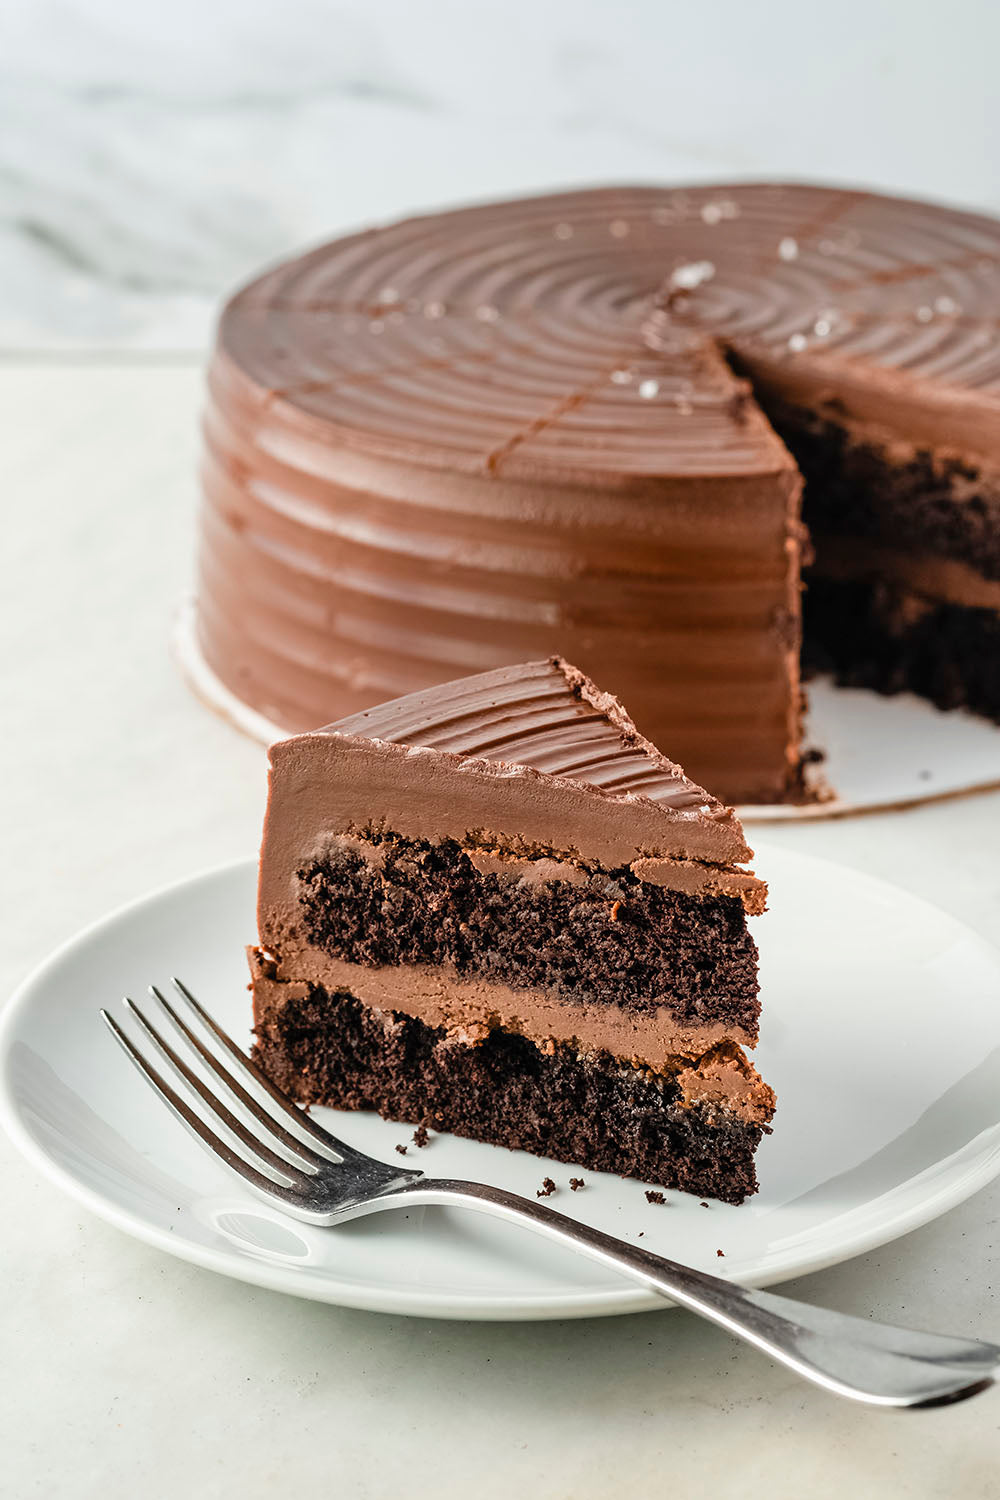 Slice of Salted Chocolate Cake with Caramel dessert or pastry